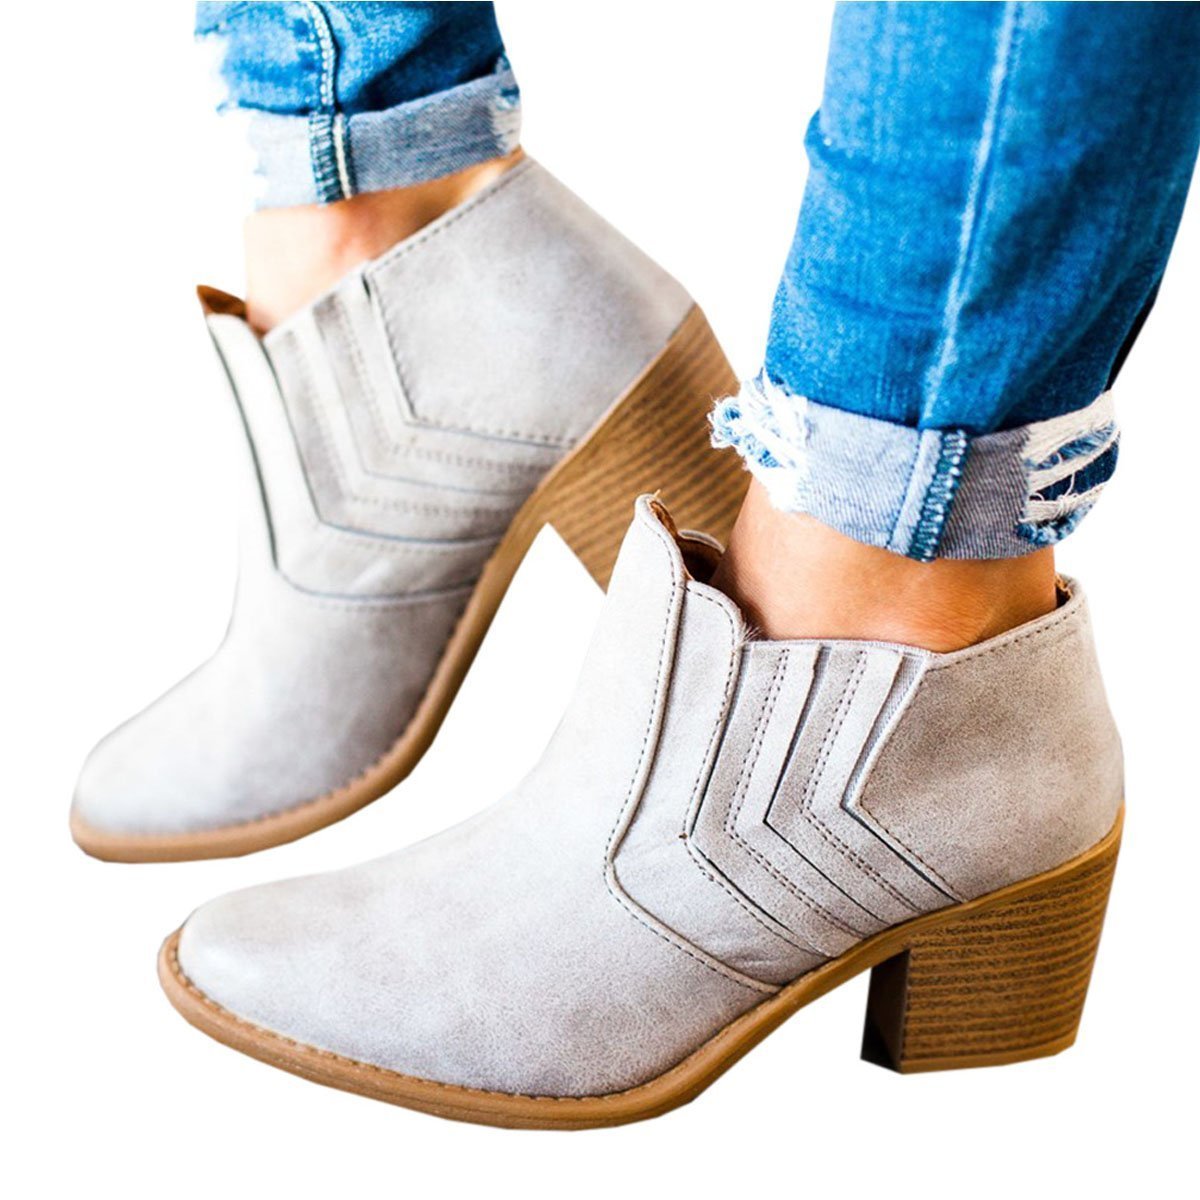 Women's Solid leather Boots Round Toe Heeled Boots Shoes